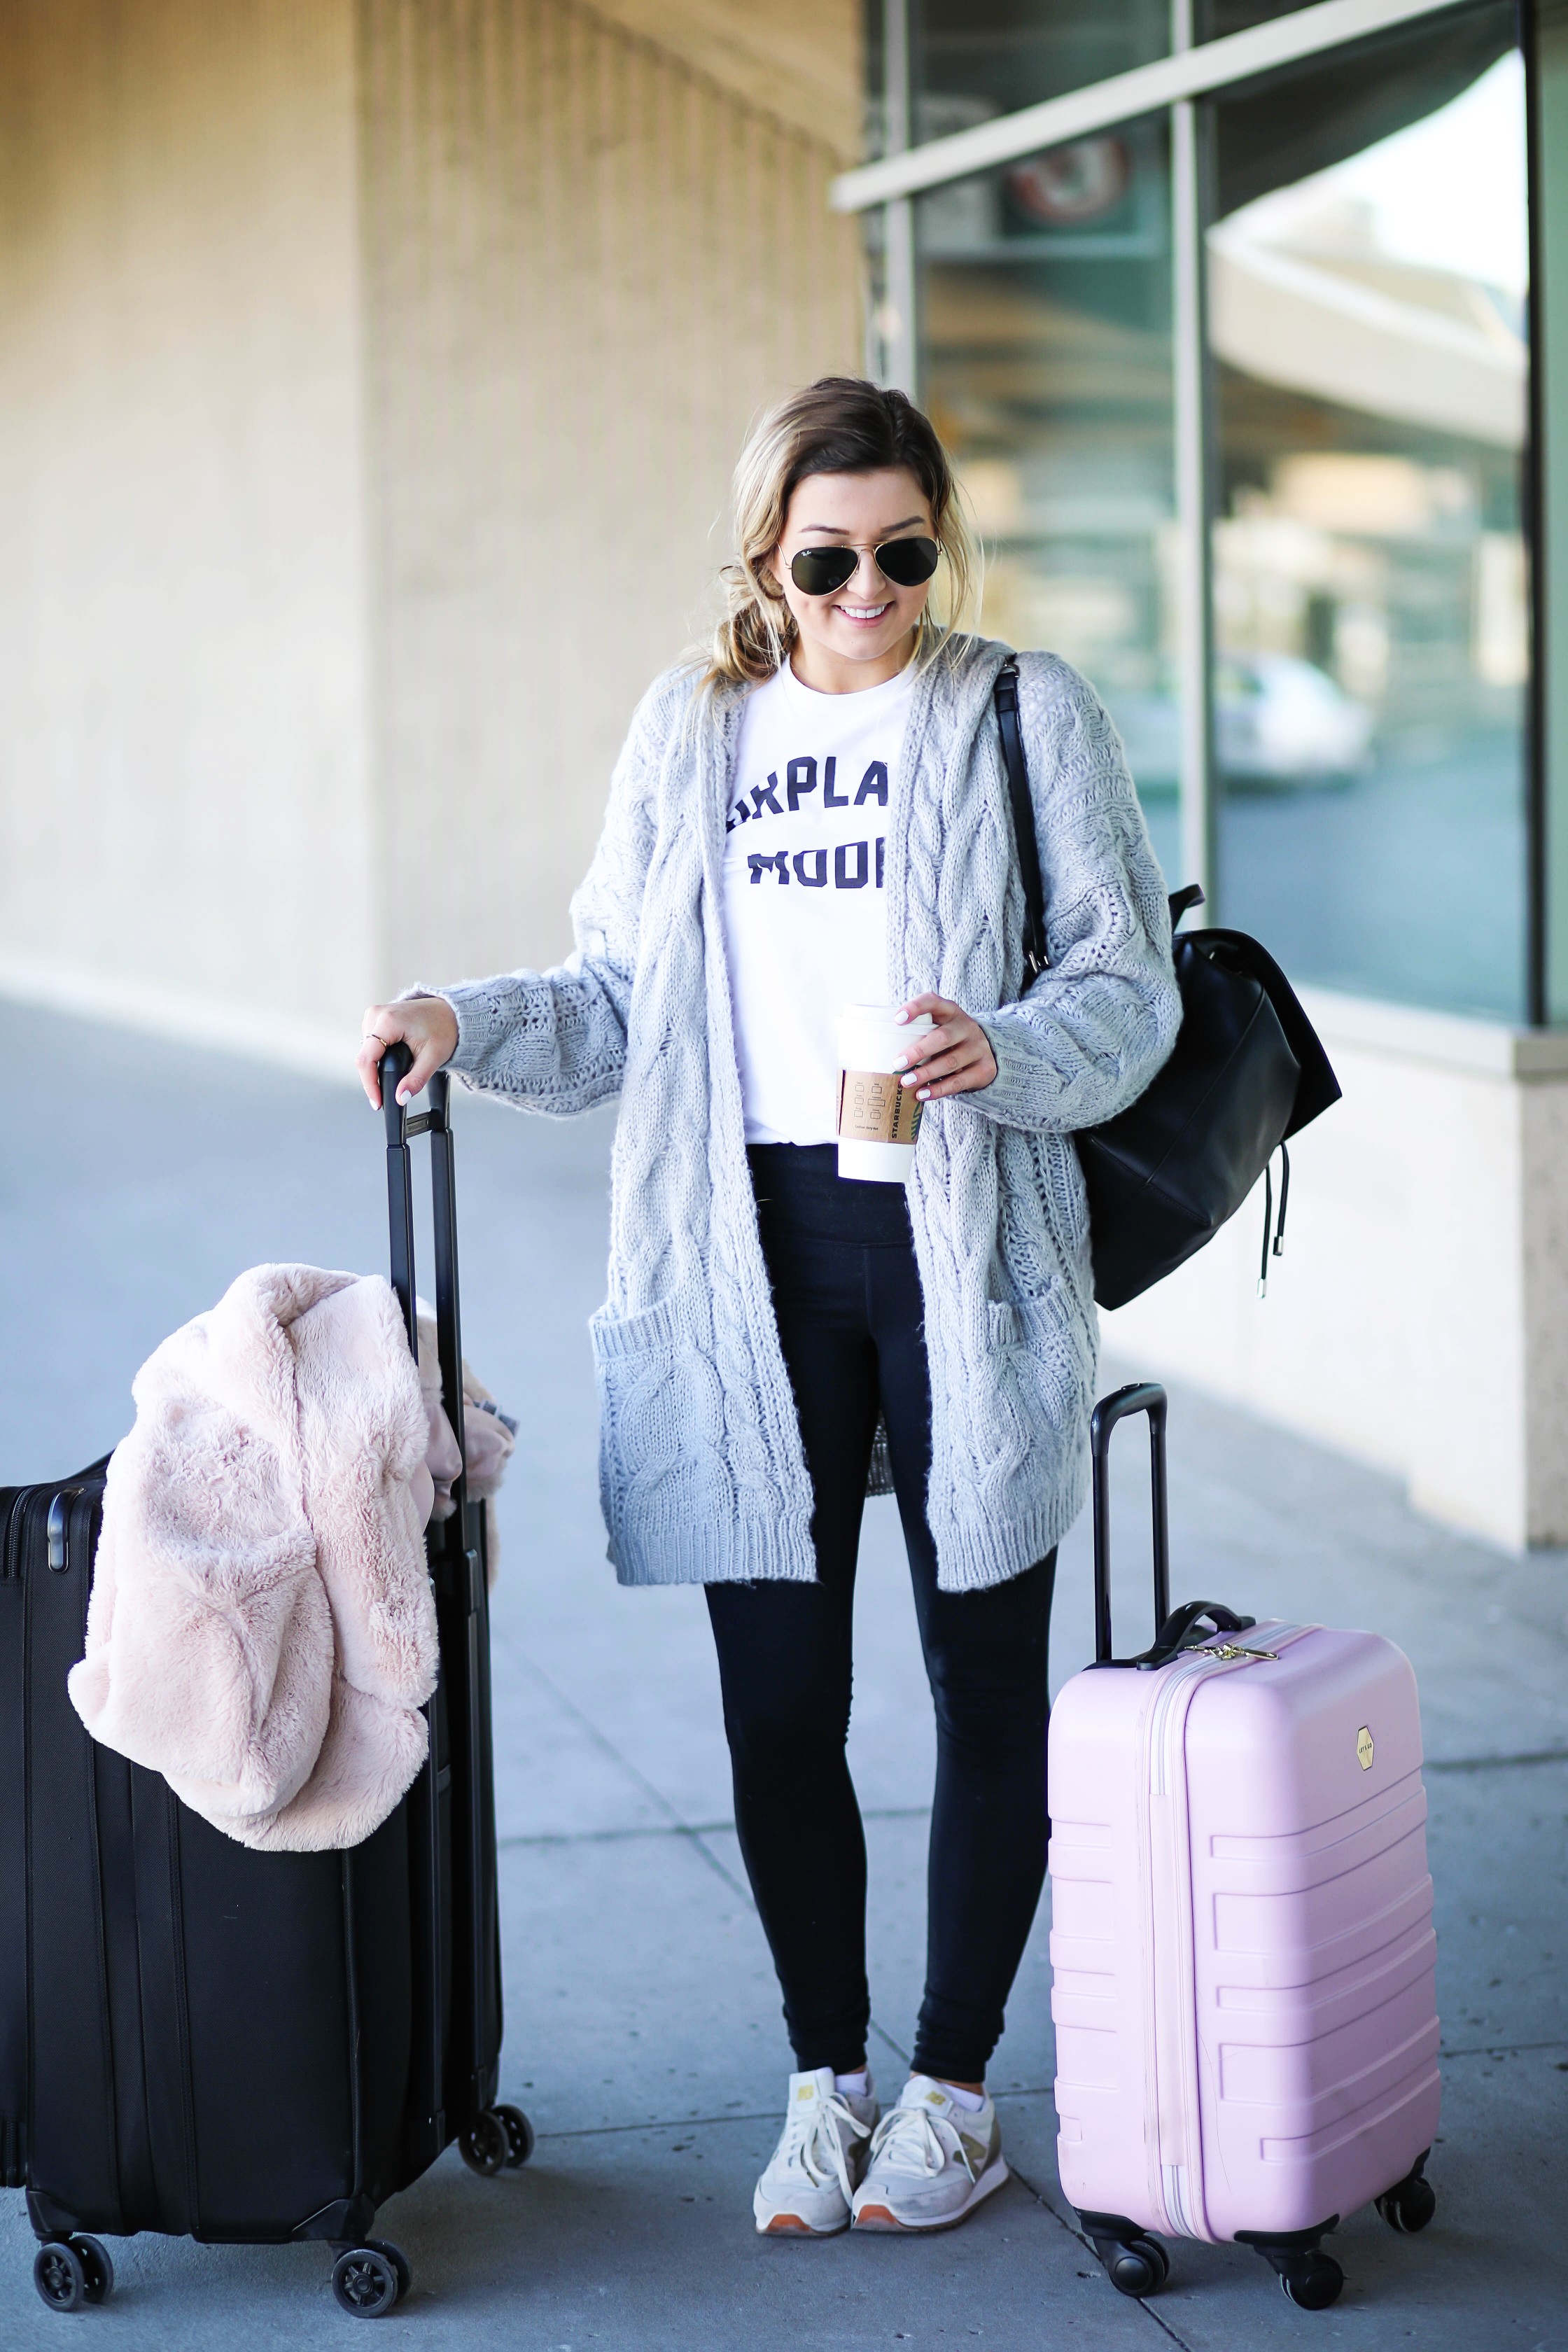 Airplane outfit! What to wear on an airplane. Artport style on fashion blog daily dose of charm by lauren lindmark